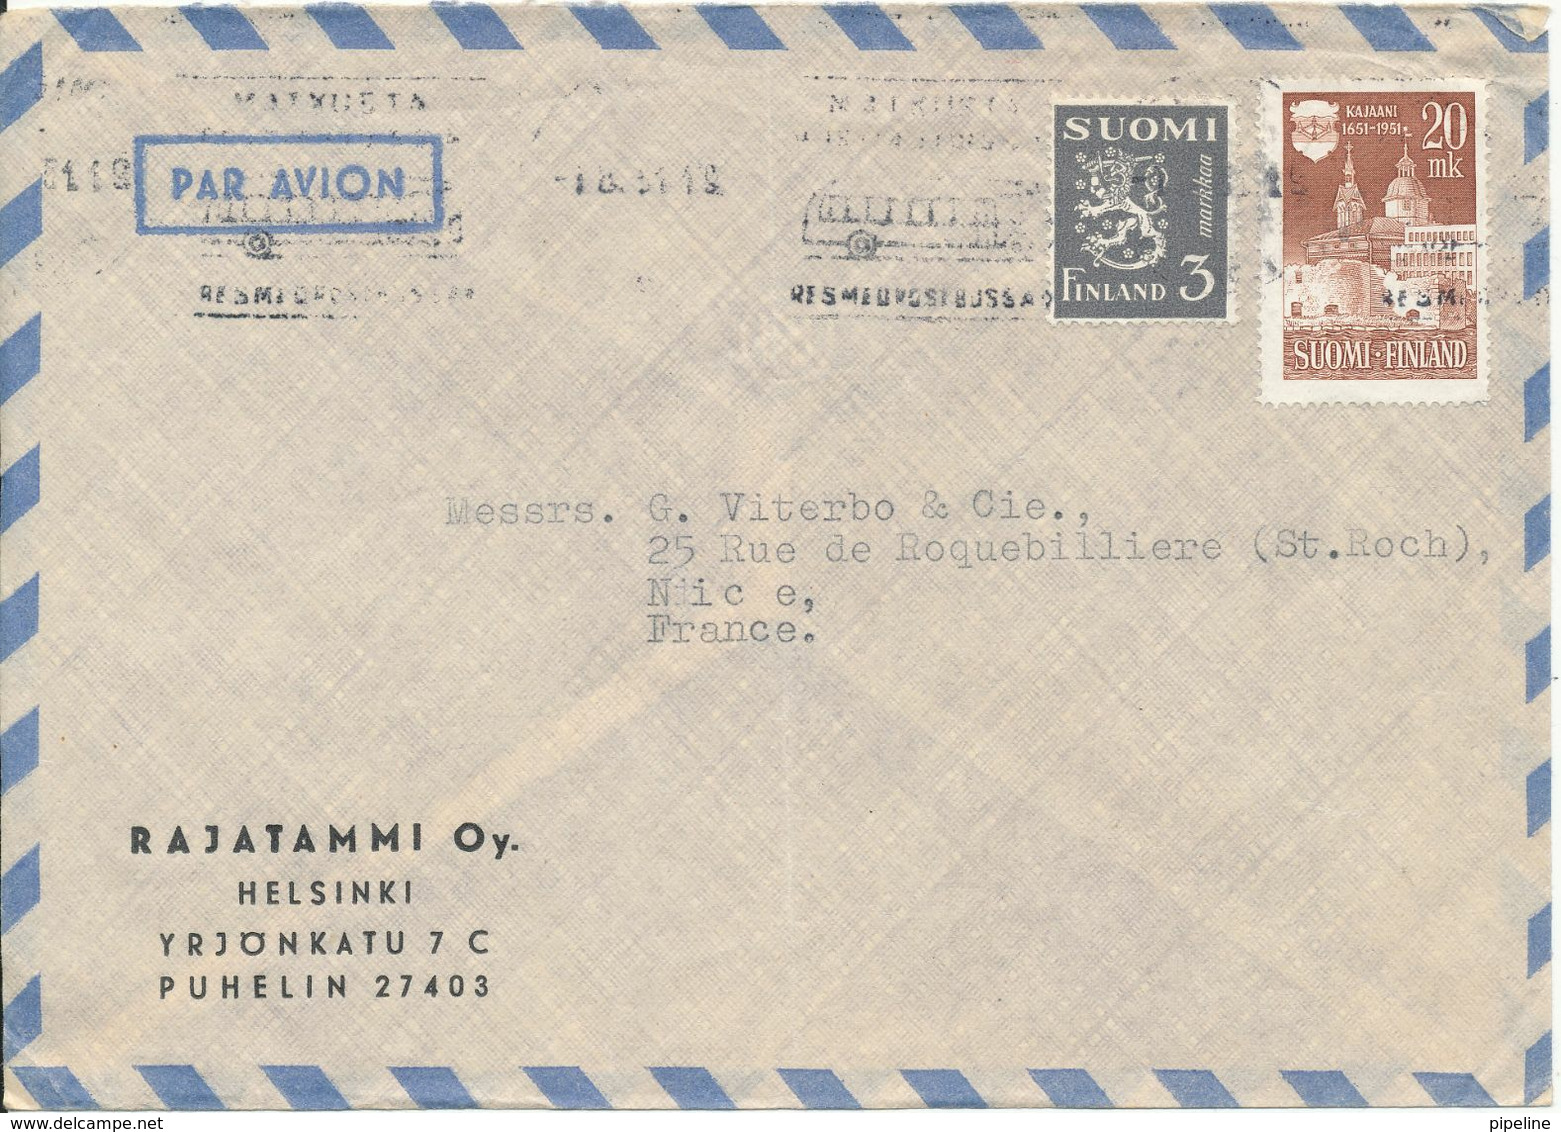 Finland Air Mail Cover Sent To France 1951 (the Cover Is Bended) - Lettres & Documents